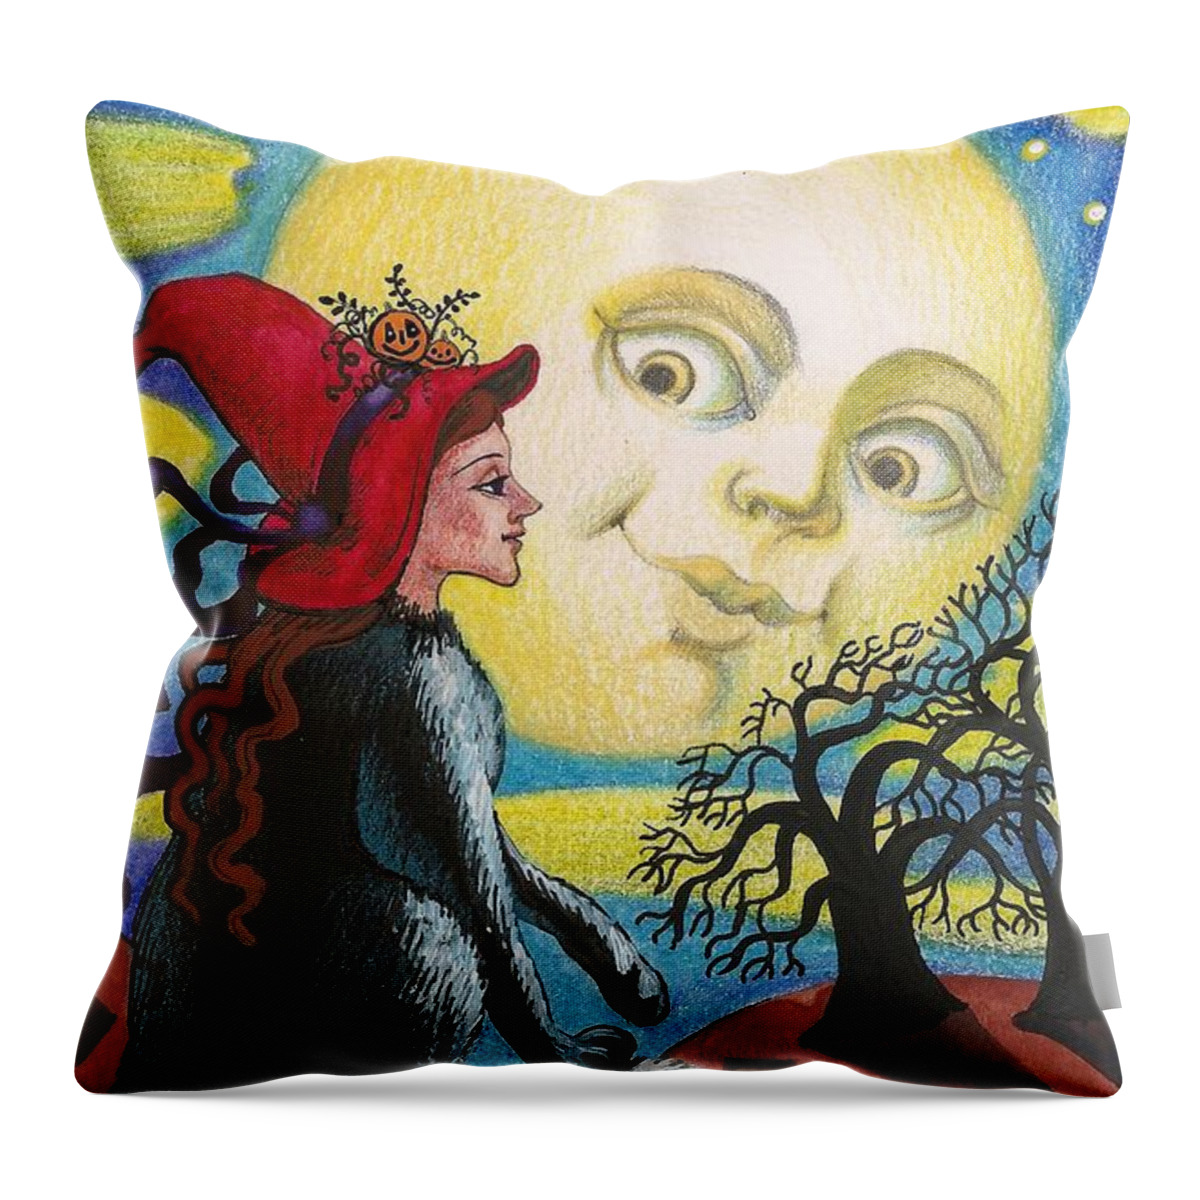 Print Throw Pillow featuring the painting Catwitch by Margaryta Yermolayeva